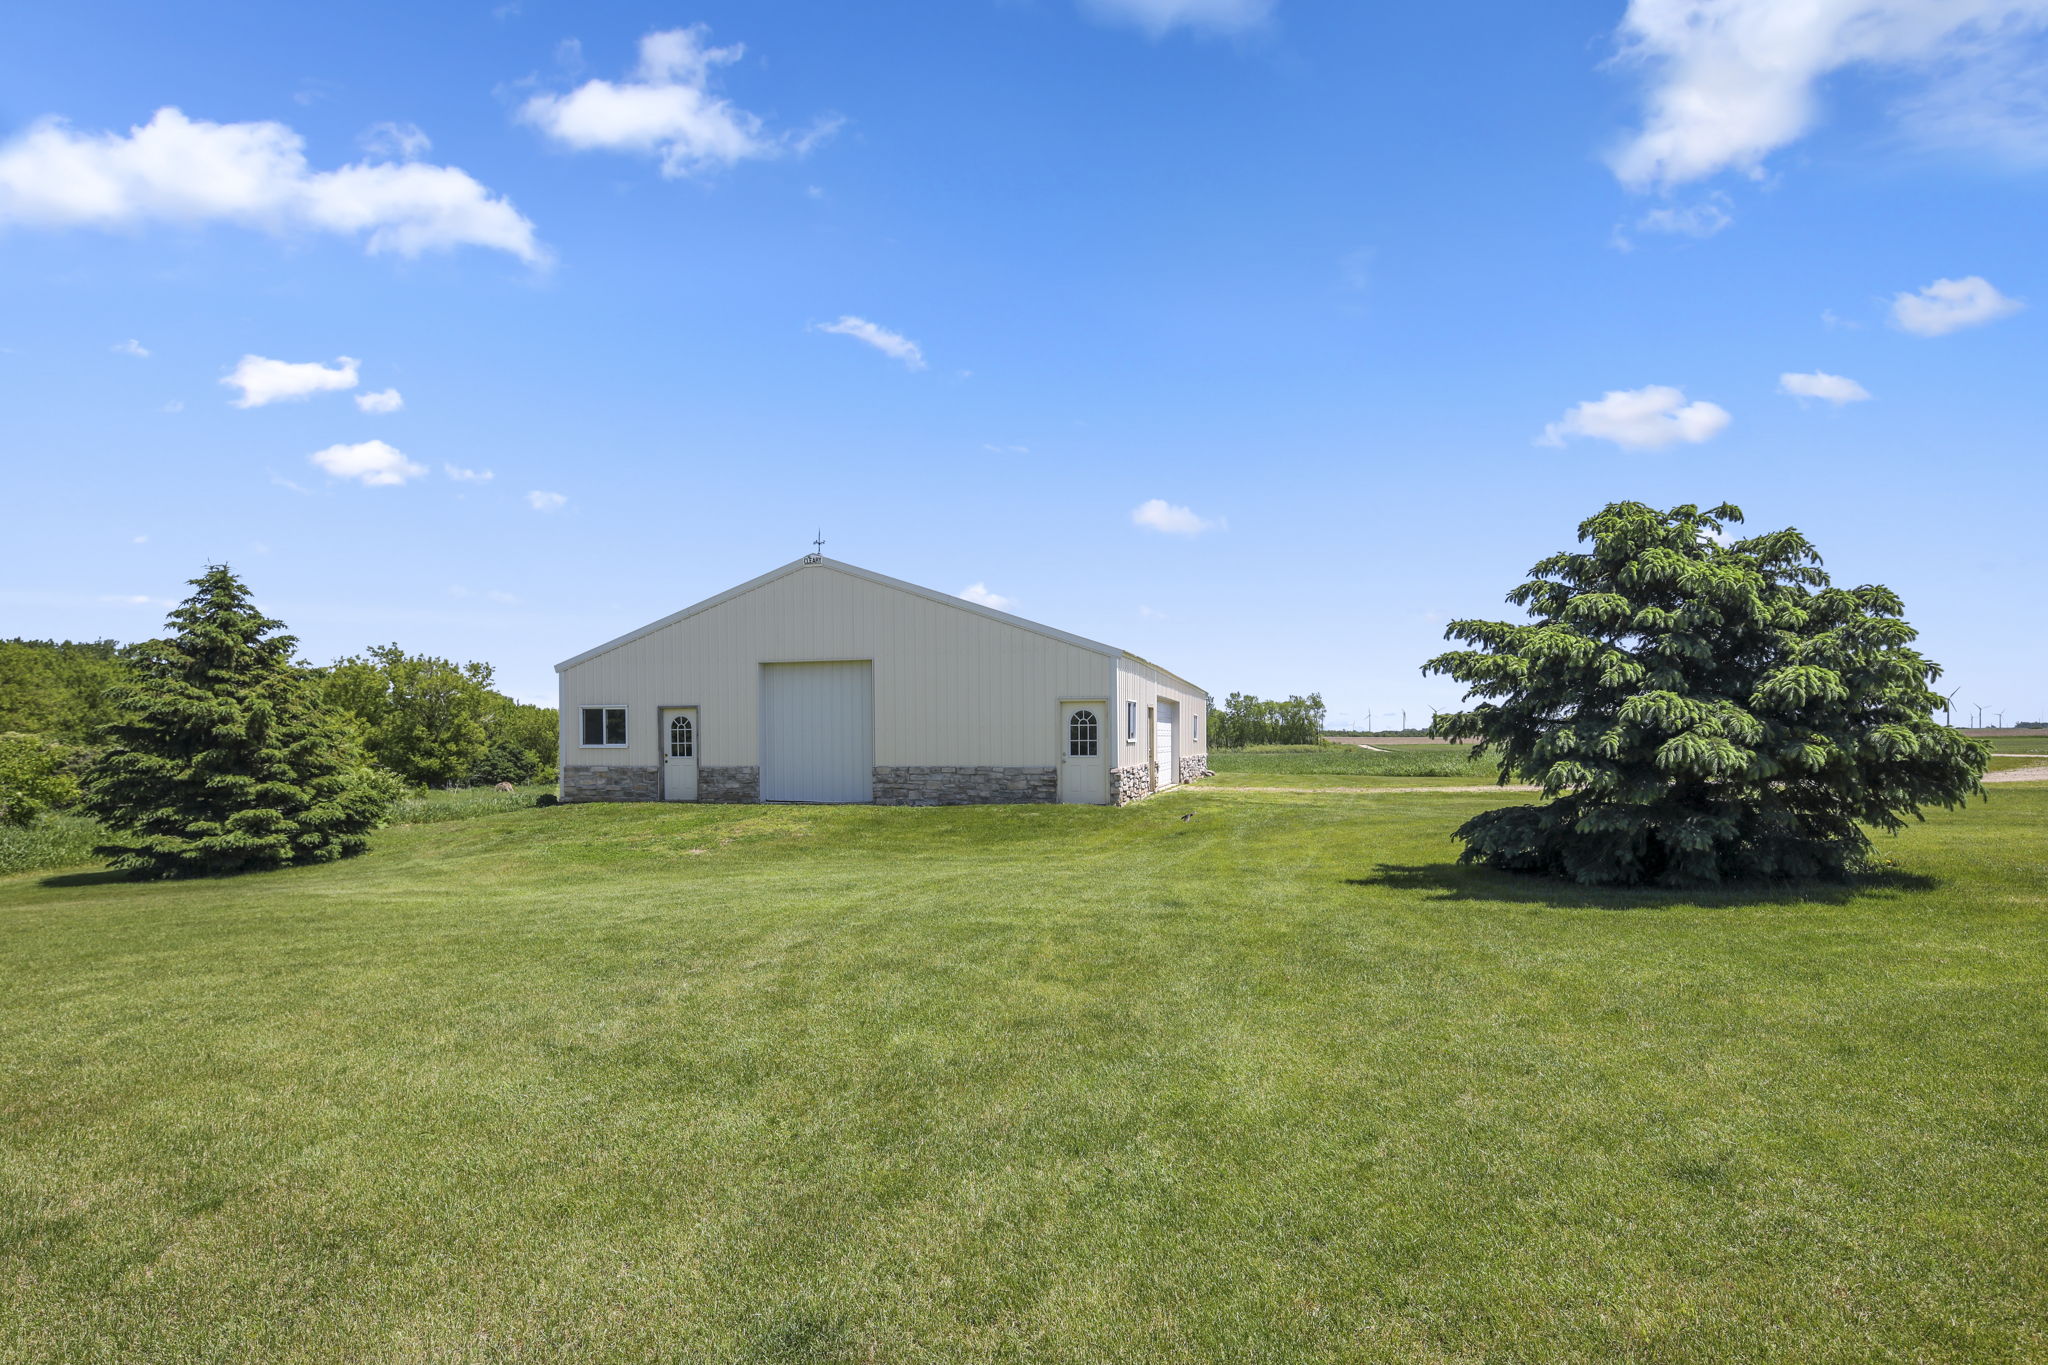  28311 660th  Ave, Dexter, MN 55926, US Photo 15